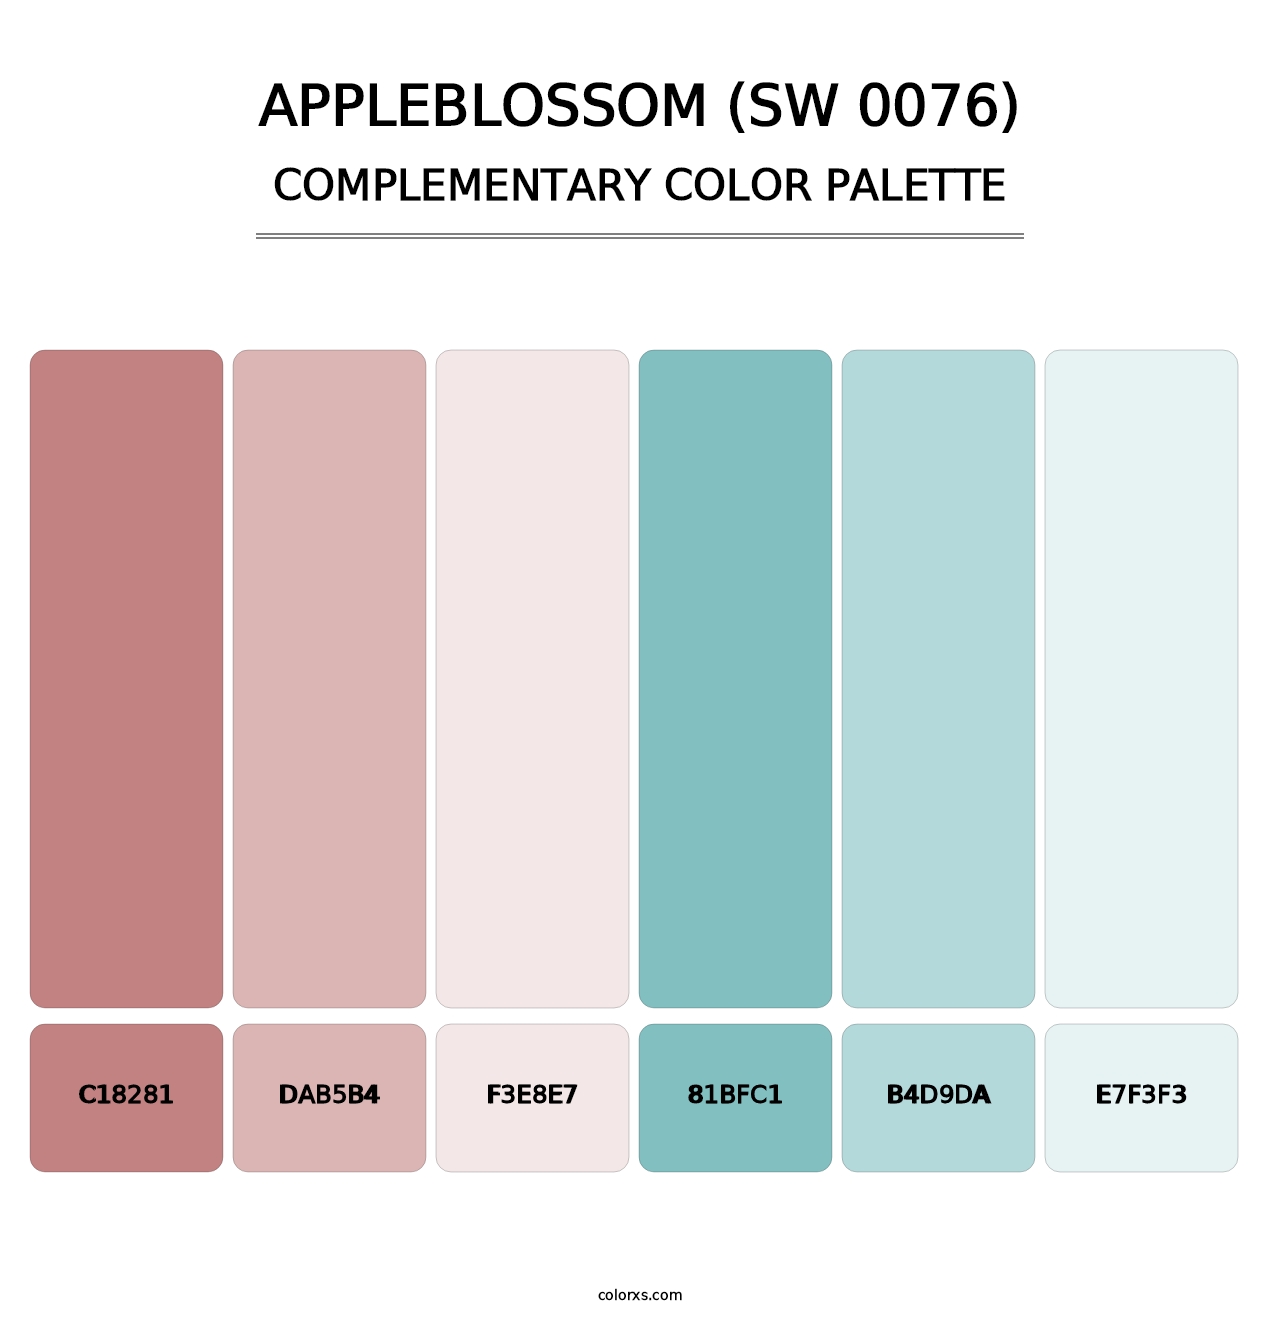 Appleblossom (SW 0076) - Complementary Color Palette